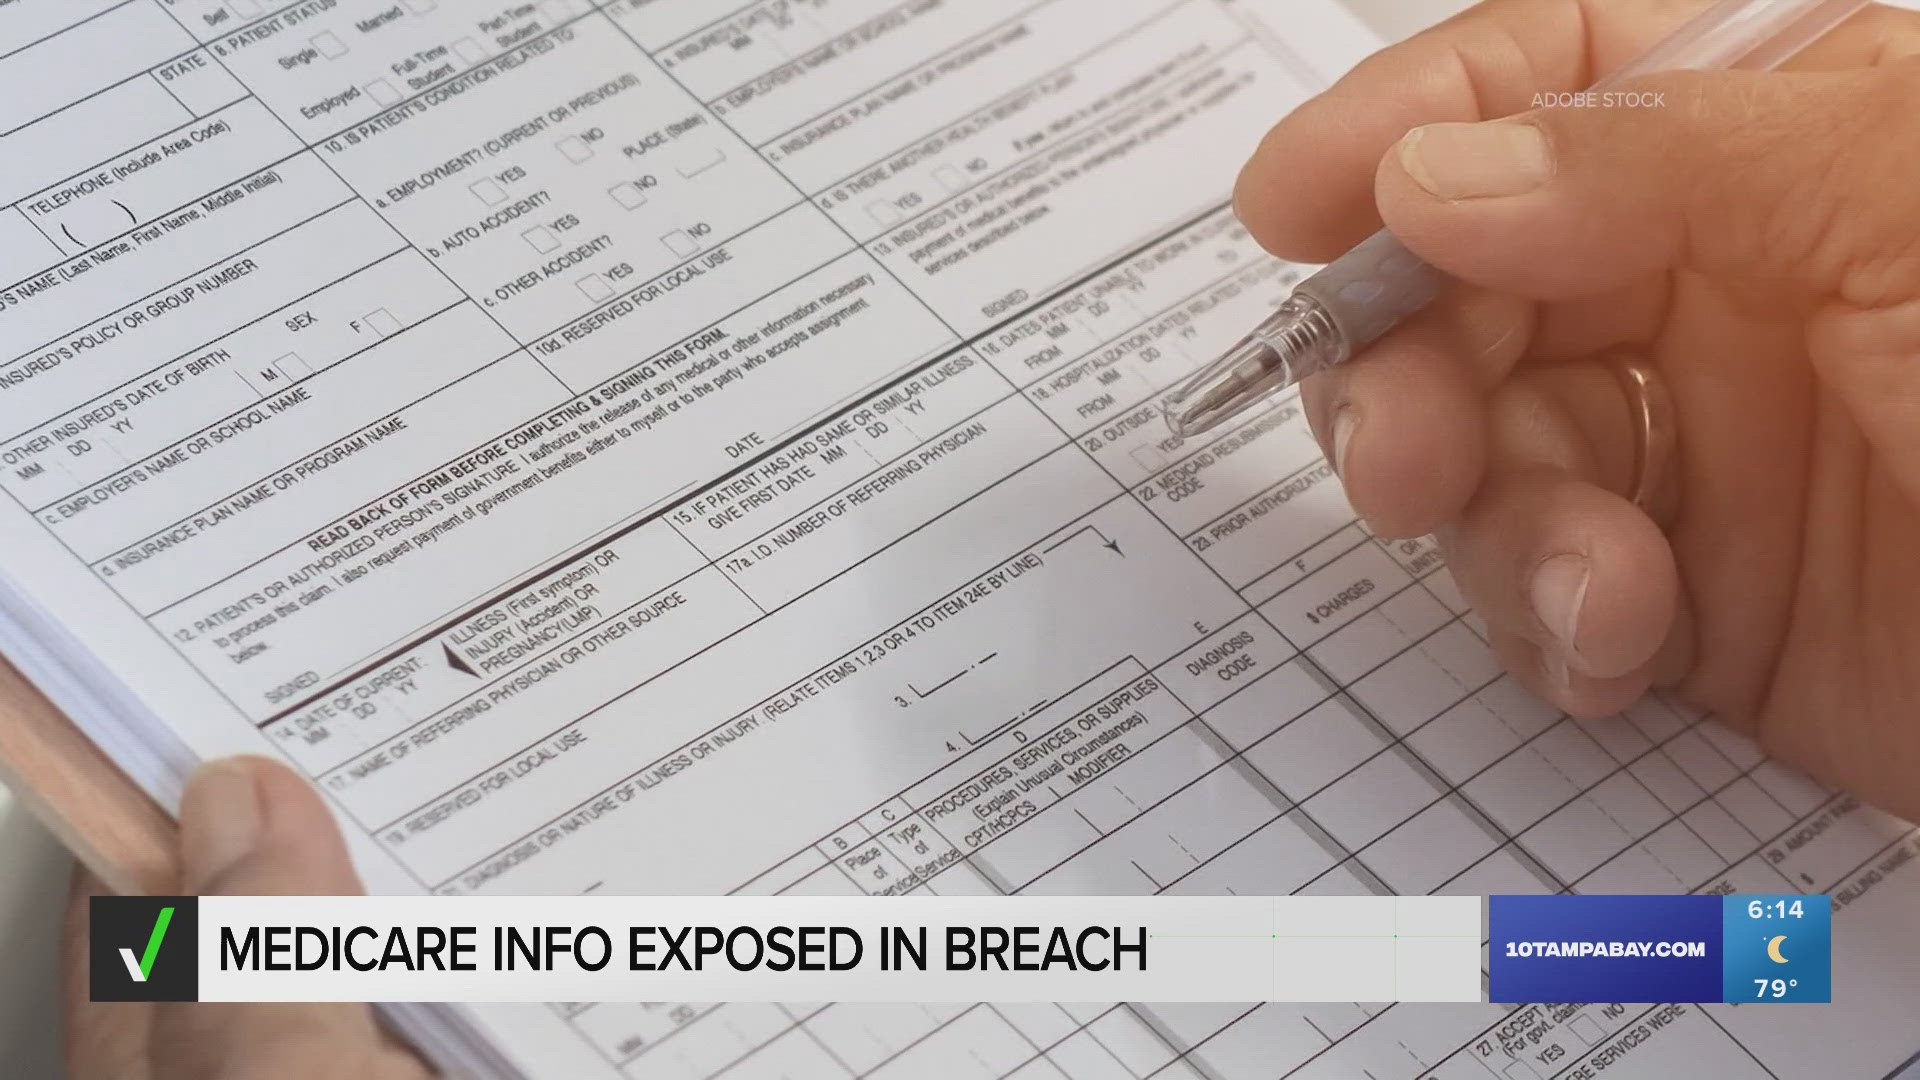 For more information on what you can do if you're affected by a data breach, visit 10TampaBay.com/VERIFY.